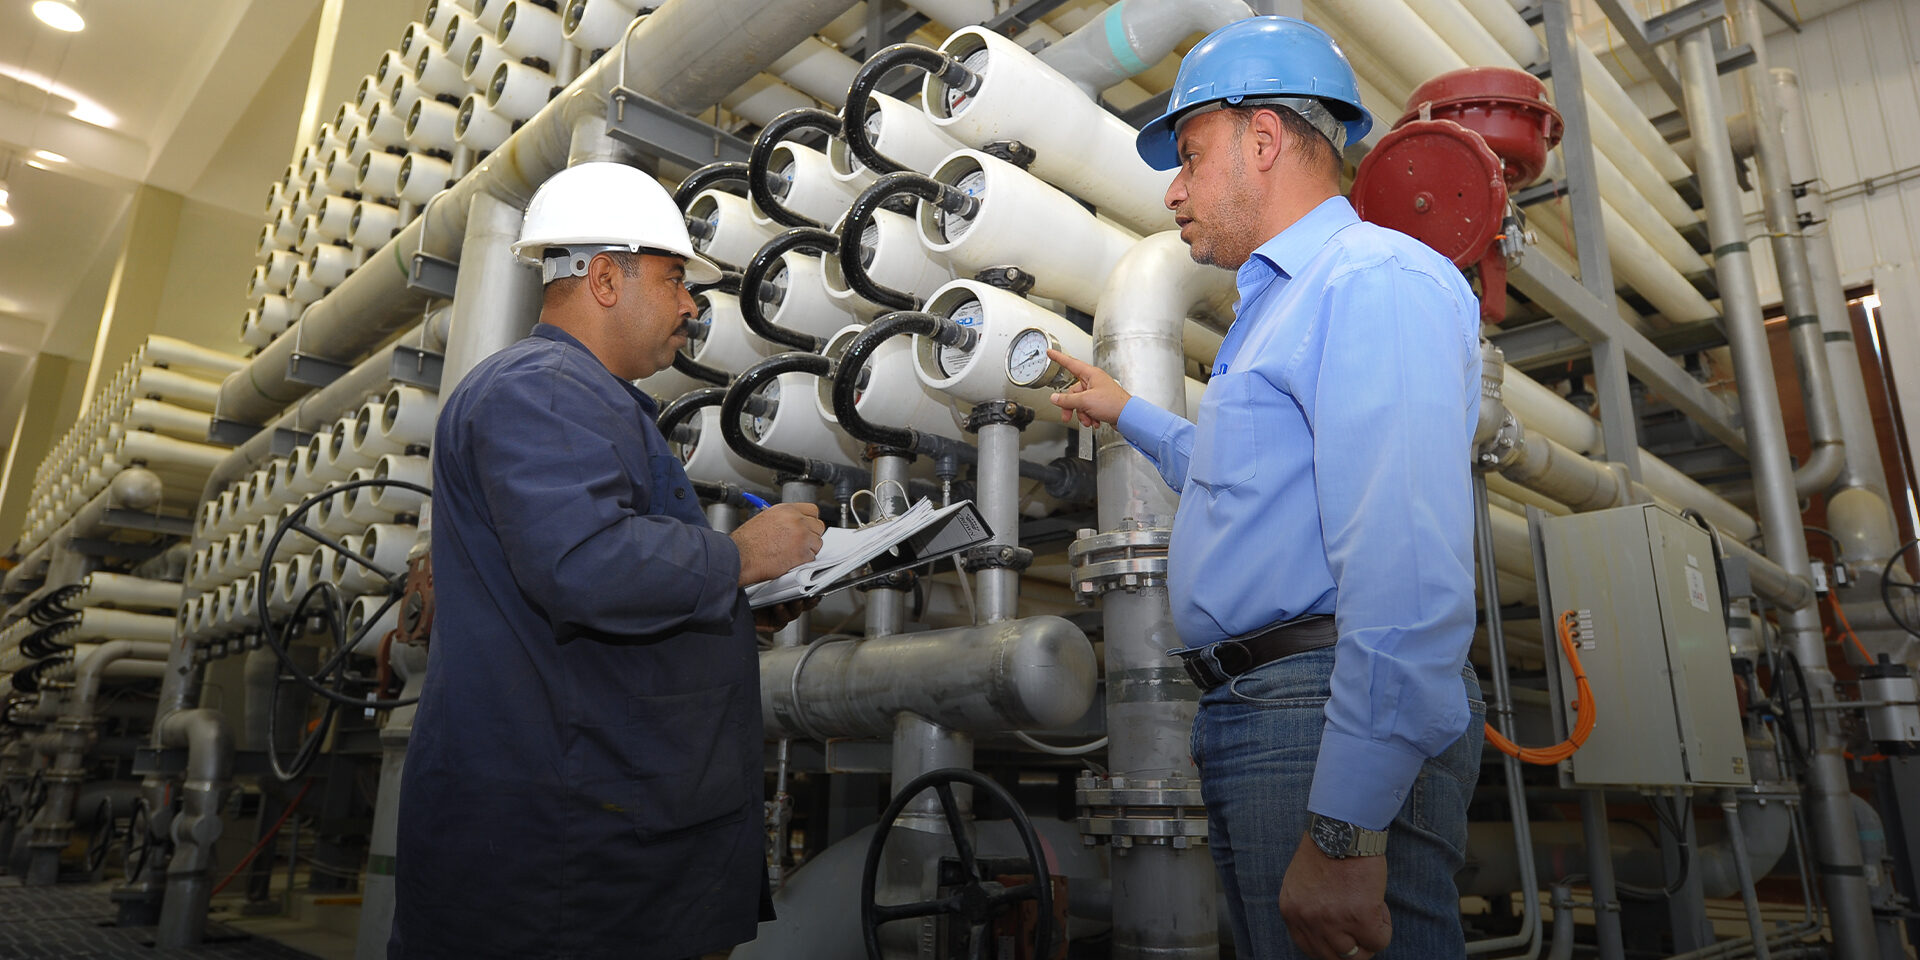 Two men wearing hard hats and standing next to a large machine comprised of pipes and tanks. One is pointing out a reading on a meter.